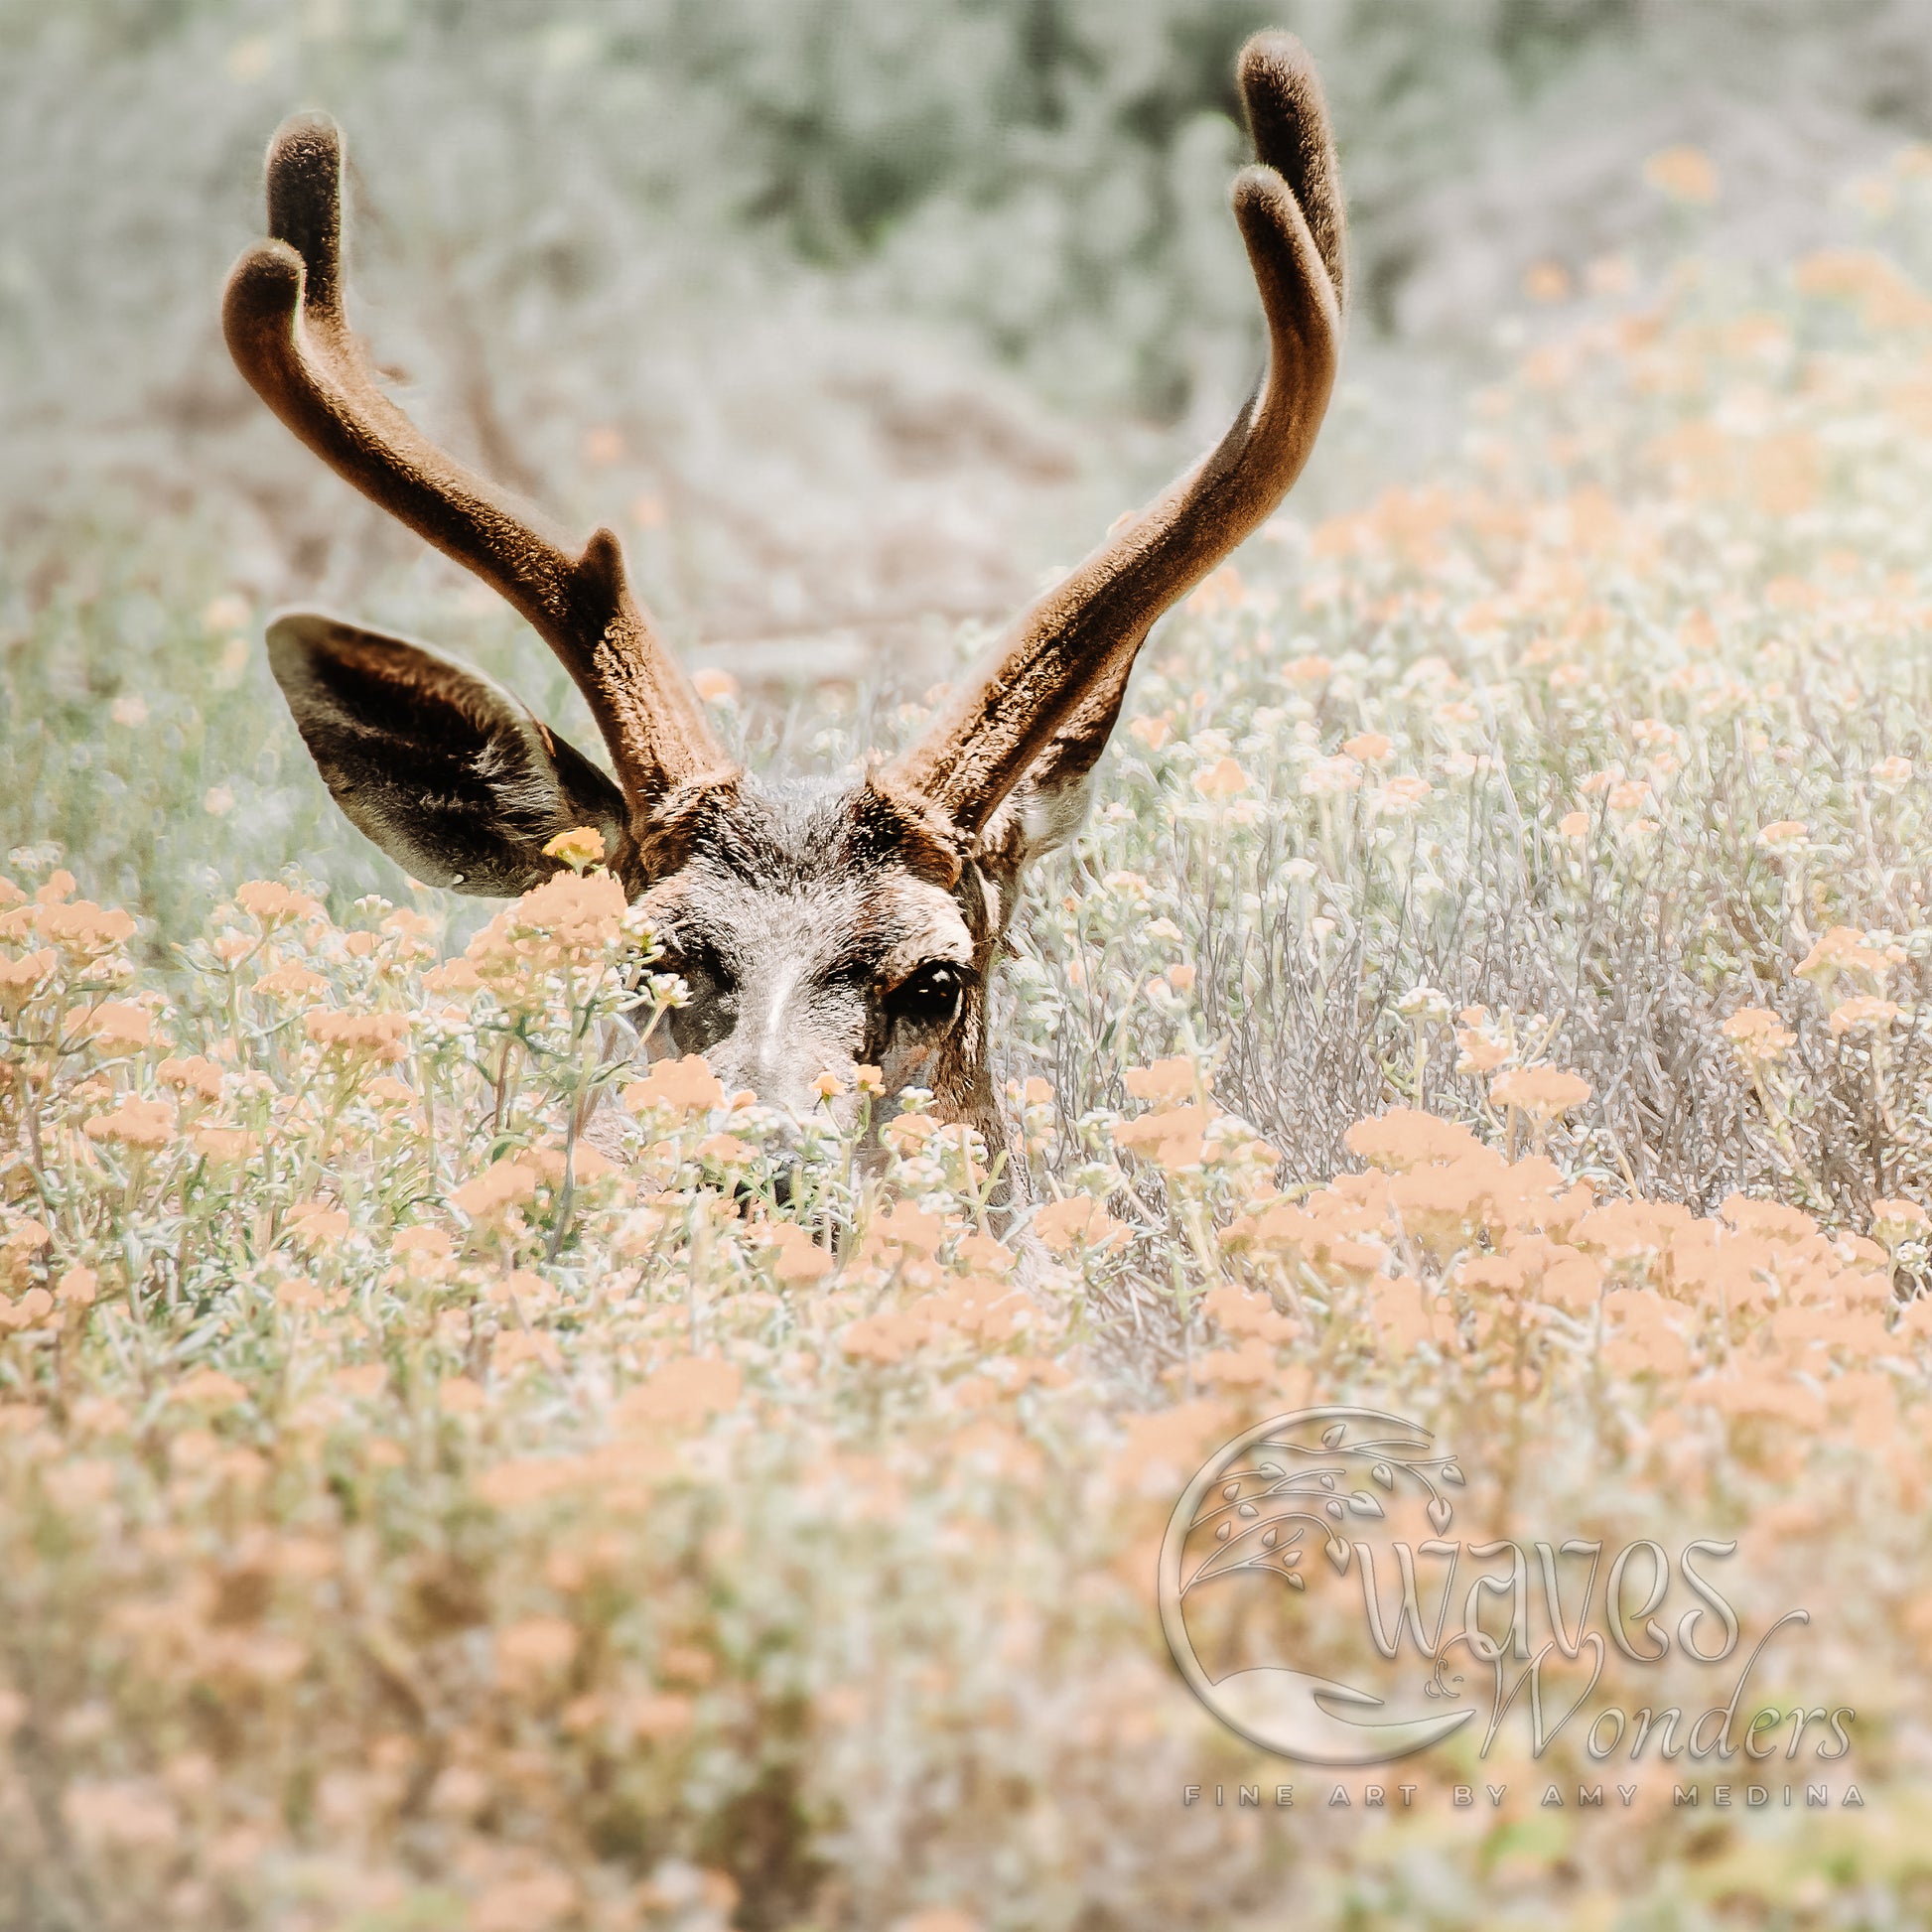 a close up of a deer's head in a field of flowers